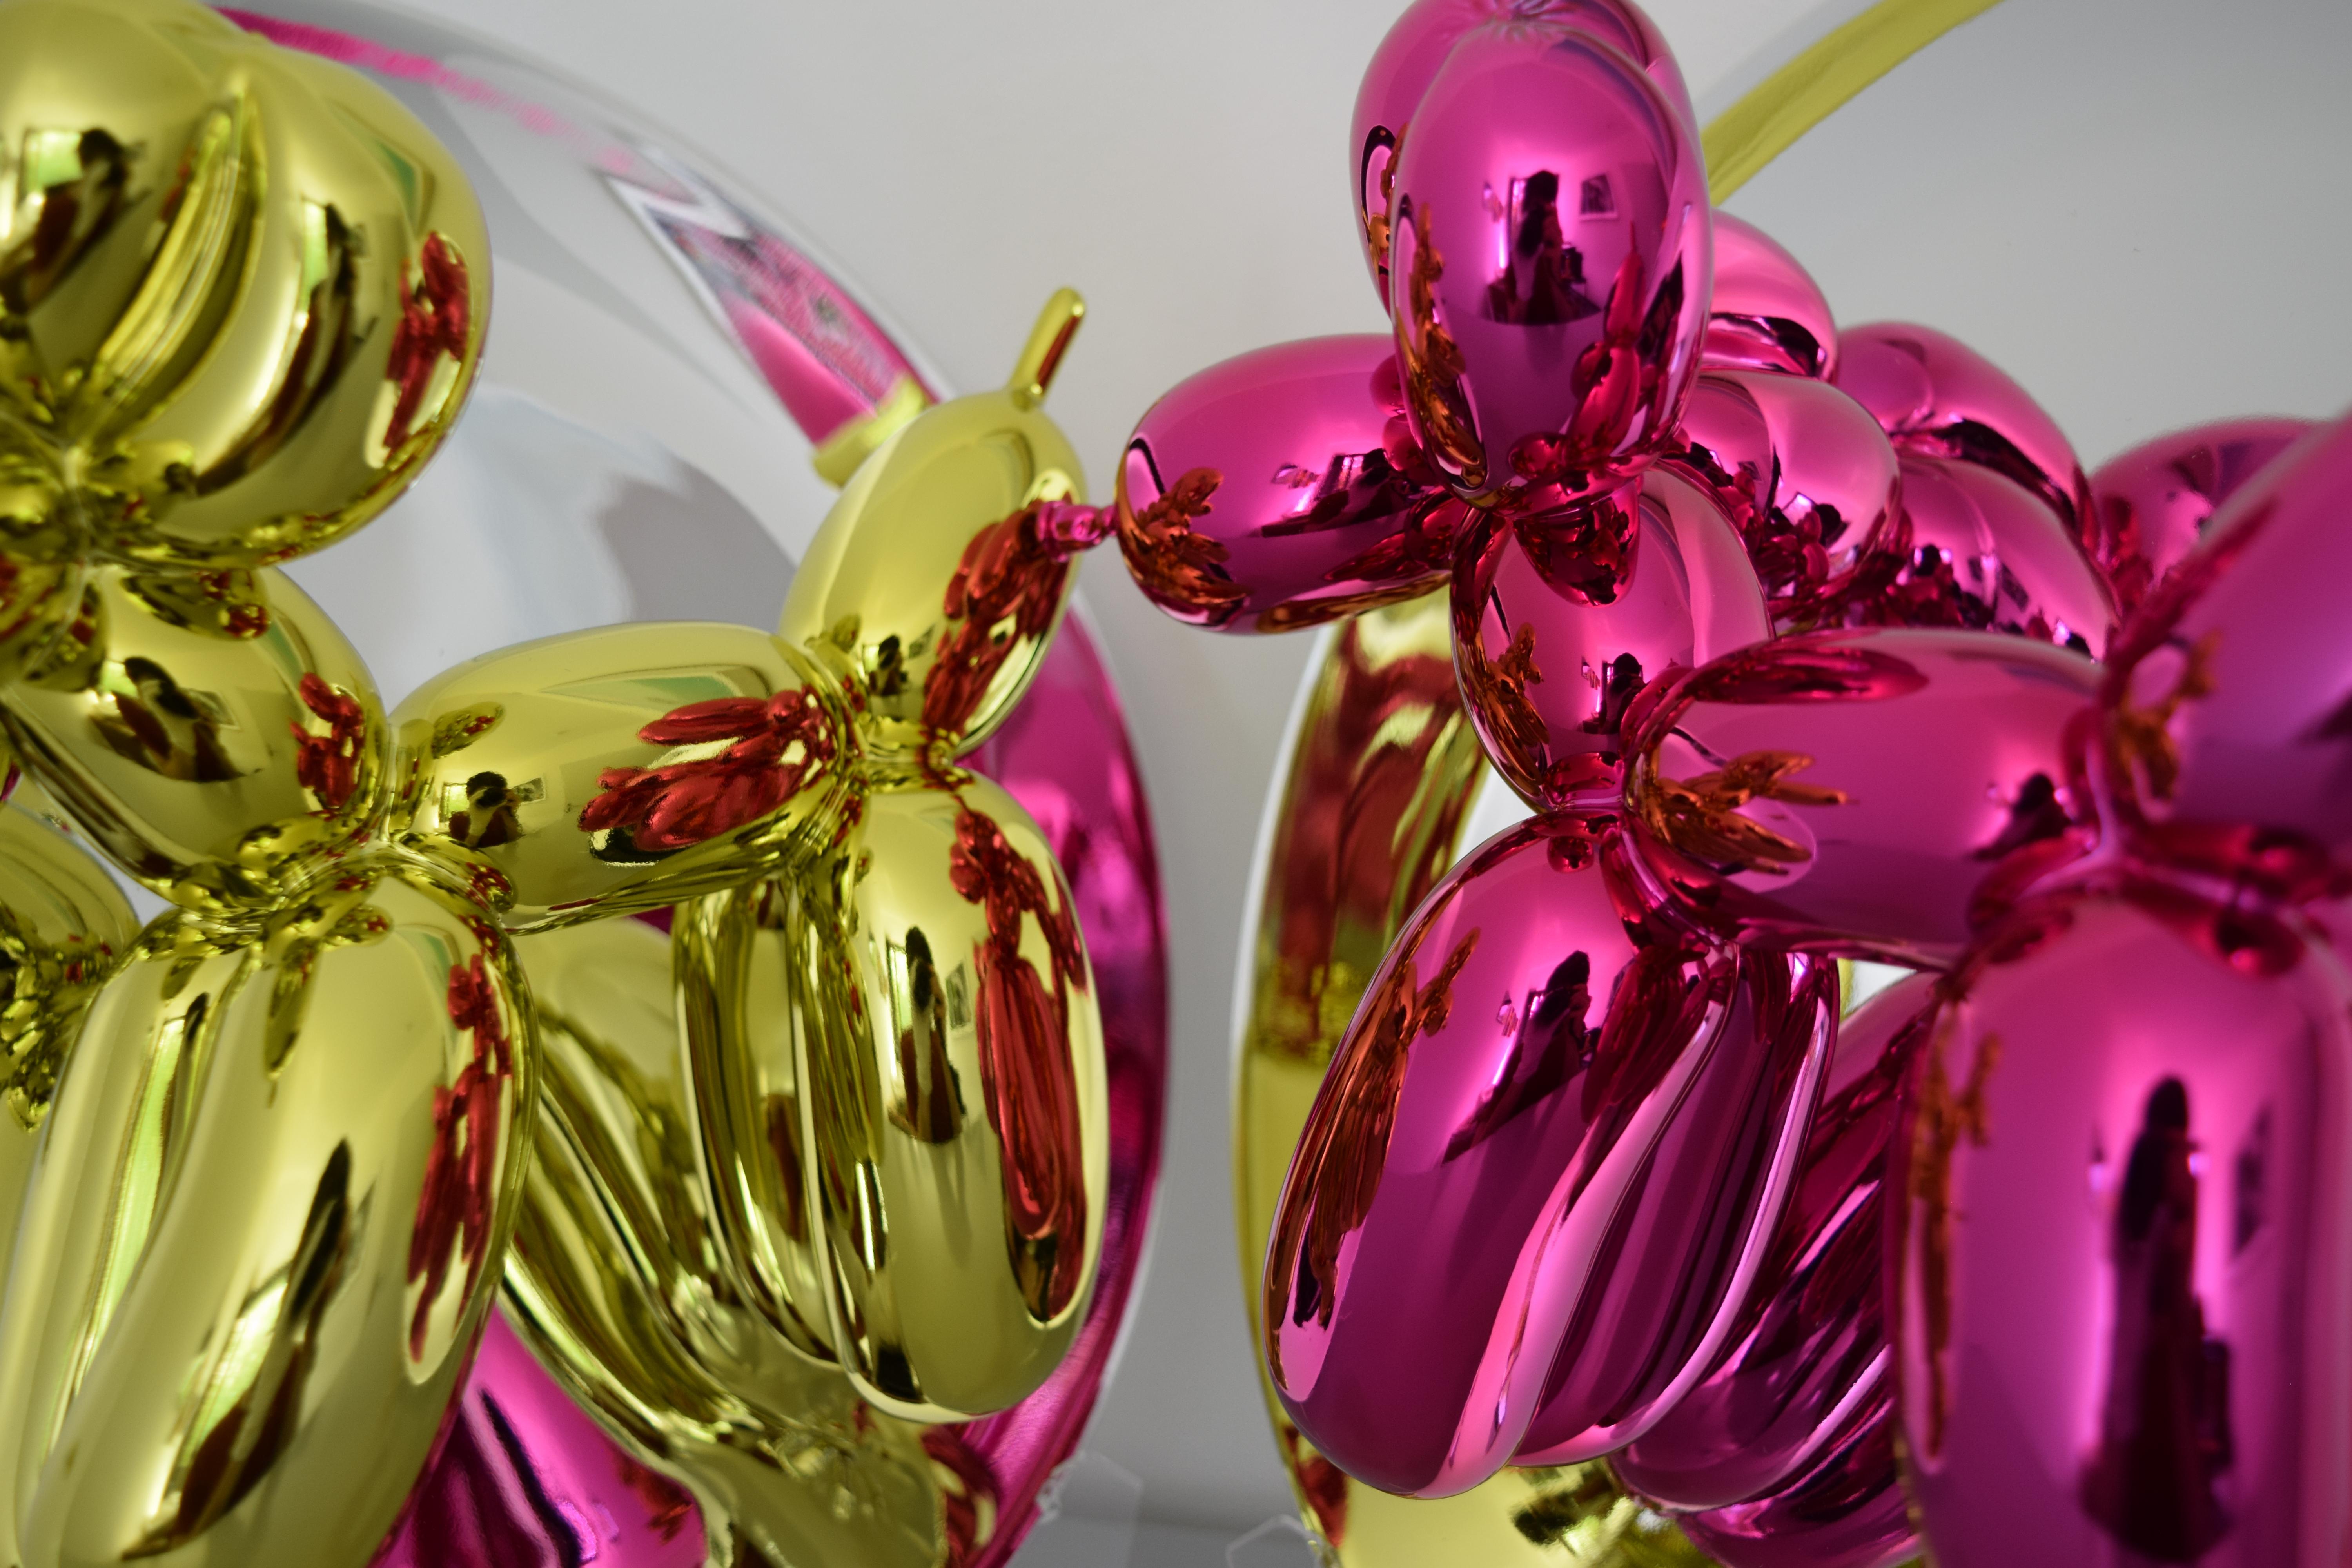 Magenta Balloon Dog Iconic Sculpture by Jeff Koons, Porcelain, Contemporary Art For Sale 14